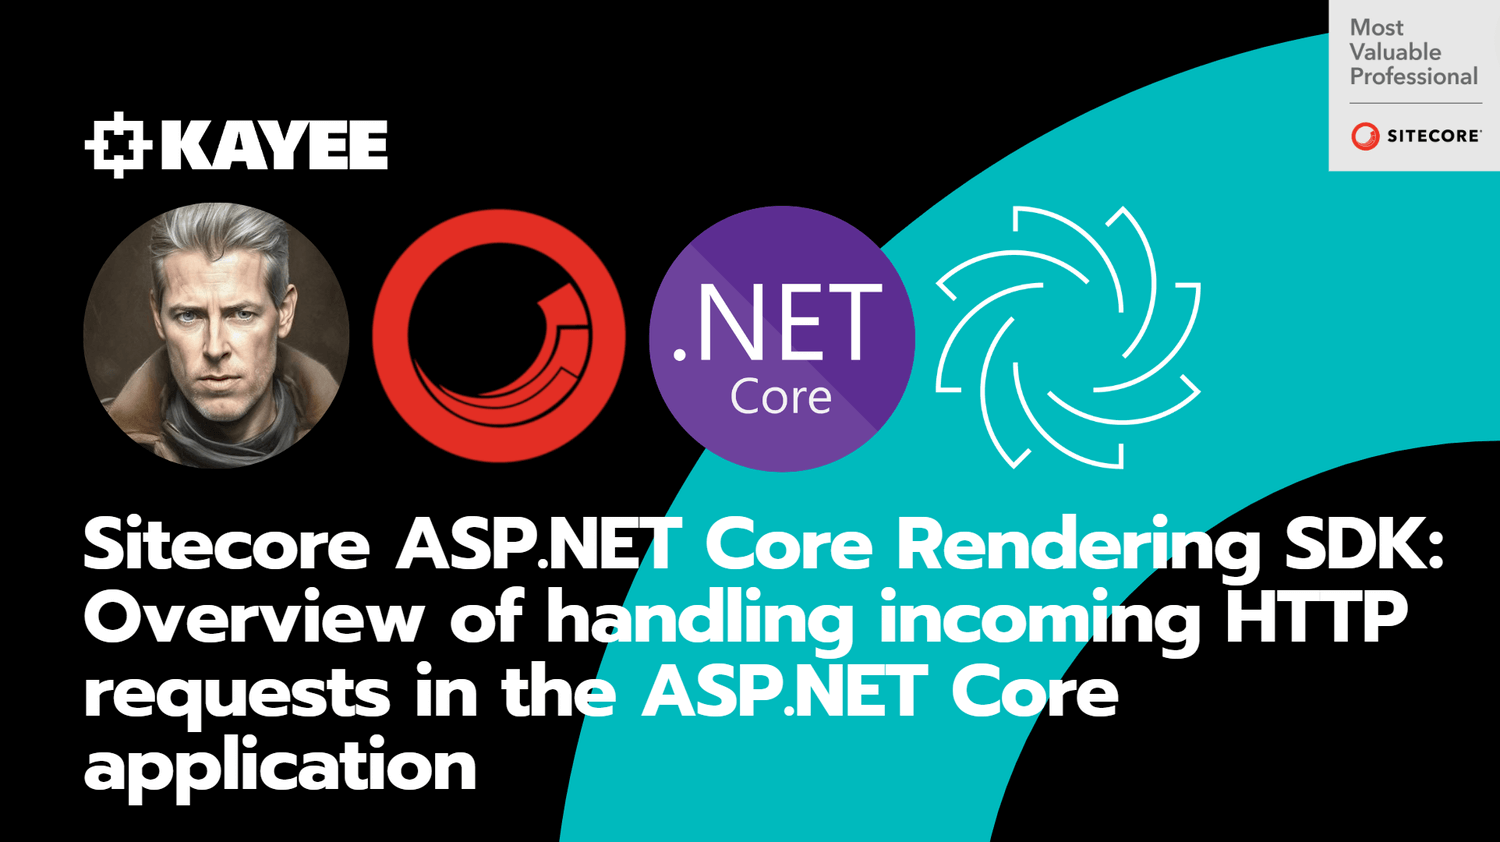 Sitecore ASP.NET Core Rendering SDK: Overview of handling incoming HTTP requests in the ASP.NET Core application